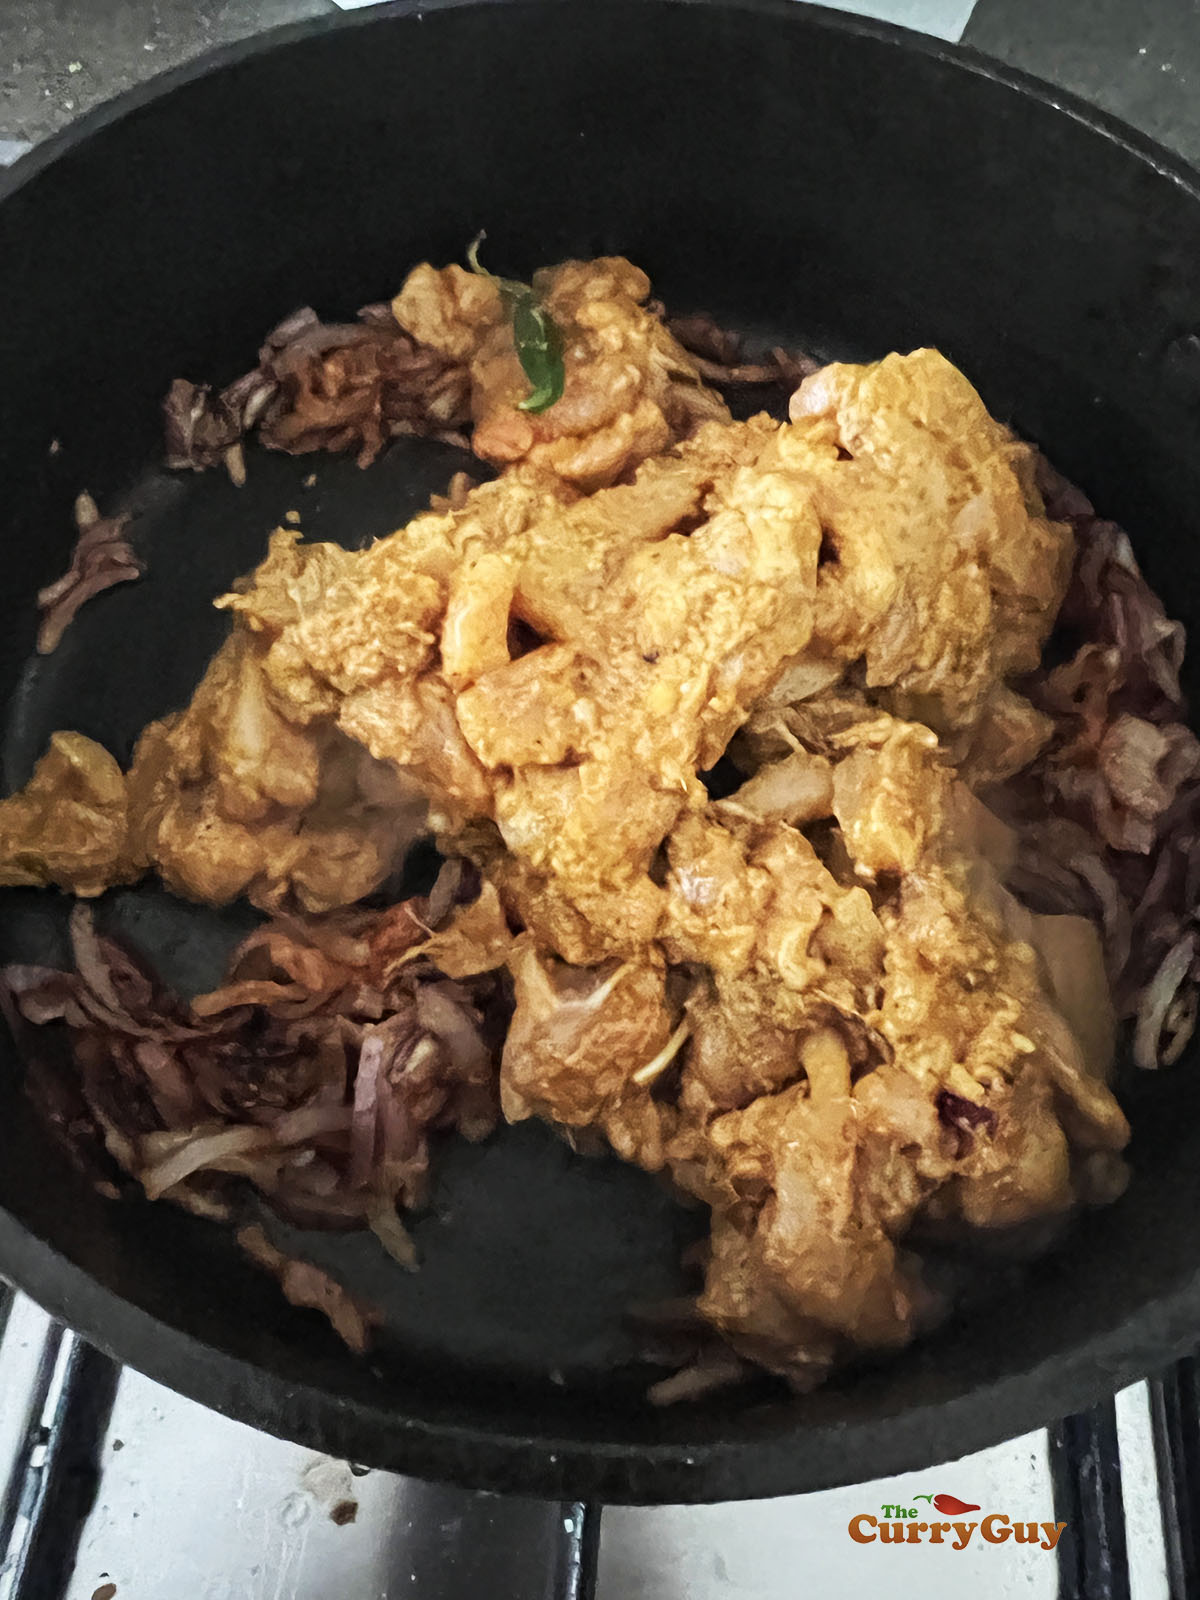 Adding the marinated chicken and chillies to the pan.